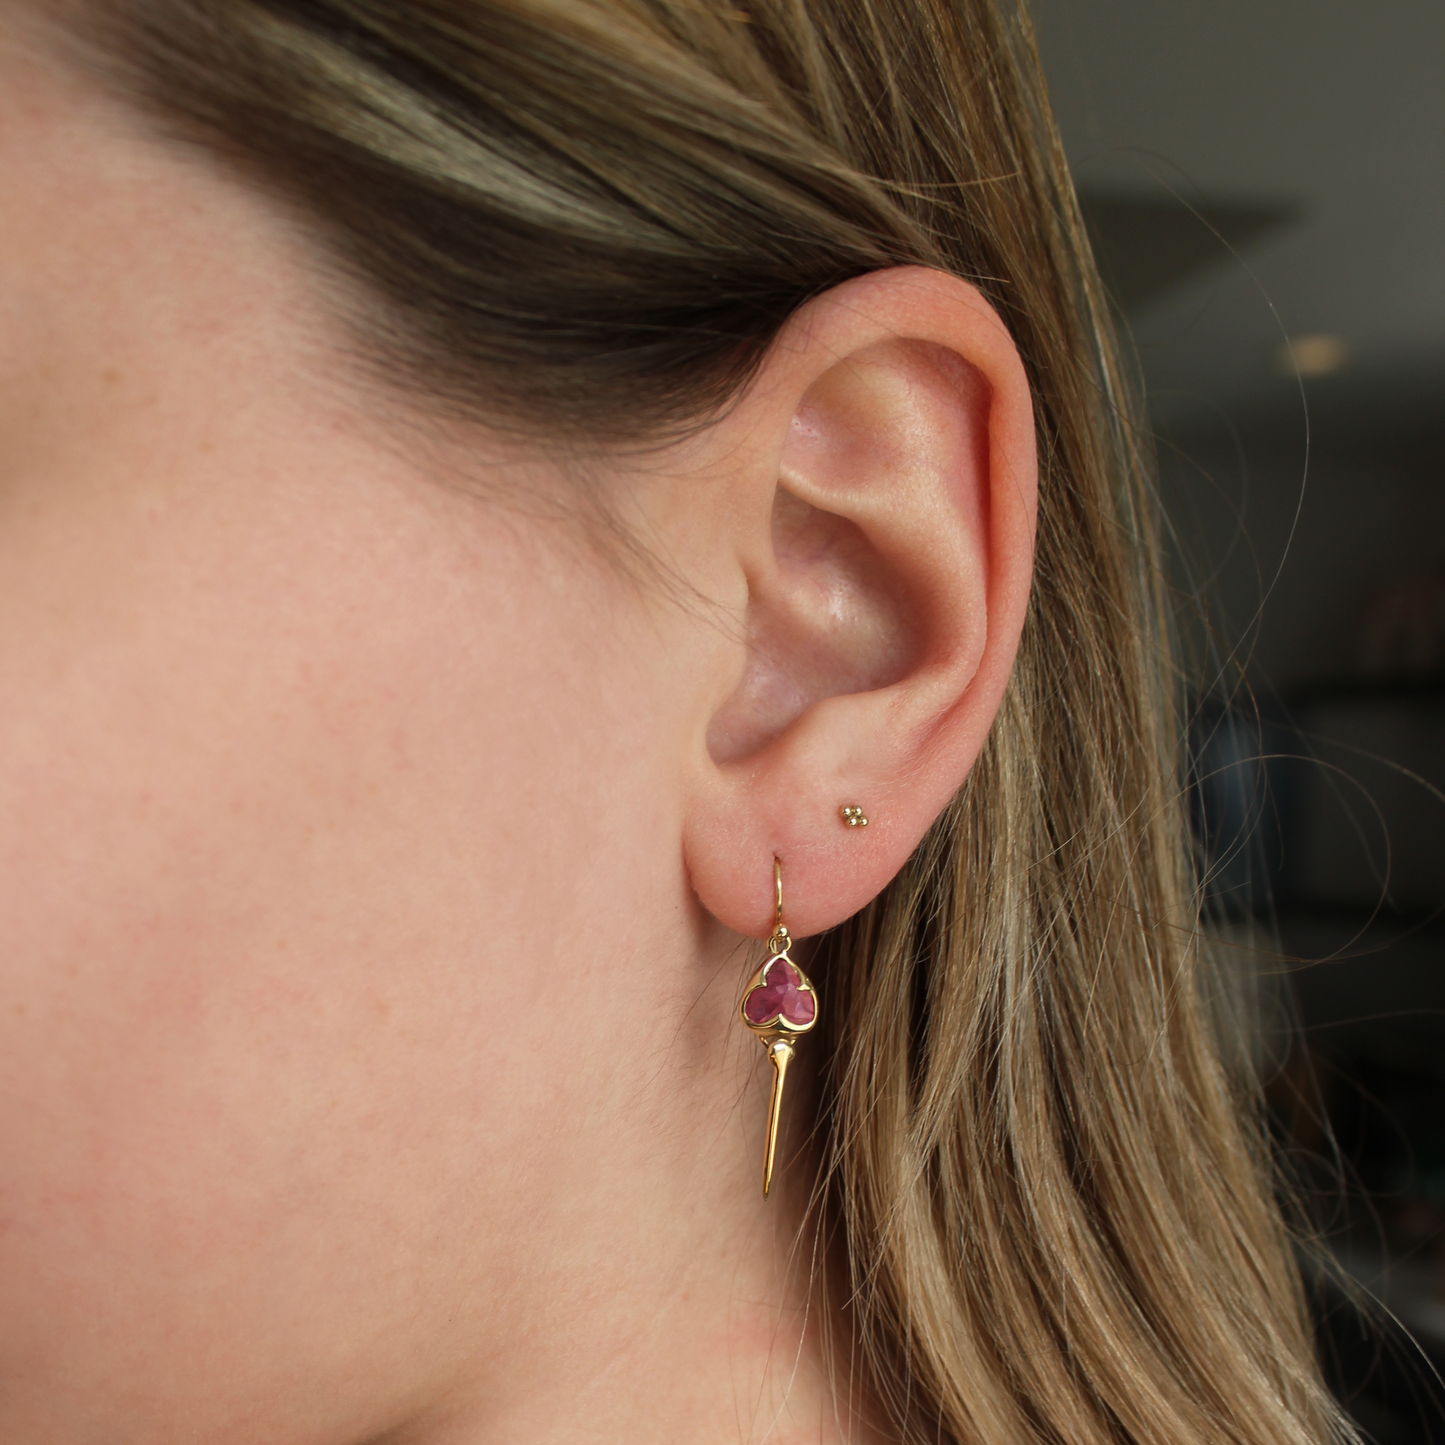 Woman wearing Yellow gold earrings with bezel set pink tourmaline stone, and an elongated gold stingray tail dangling from the bottom